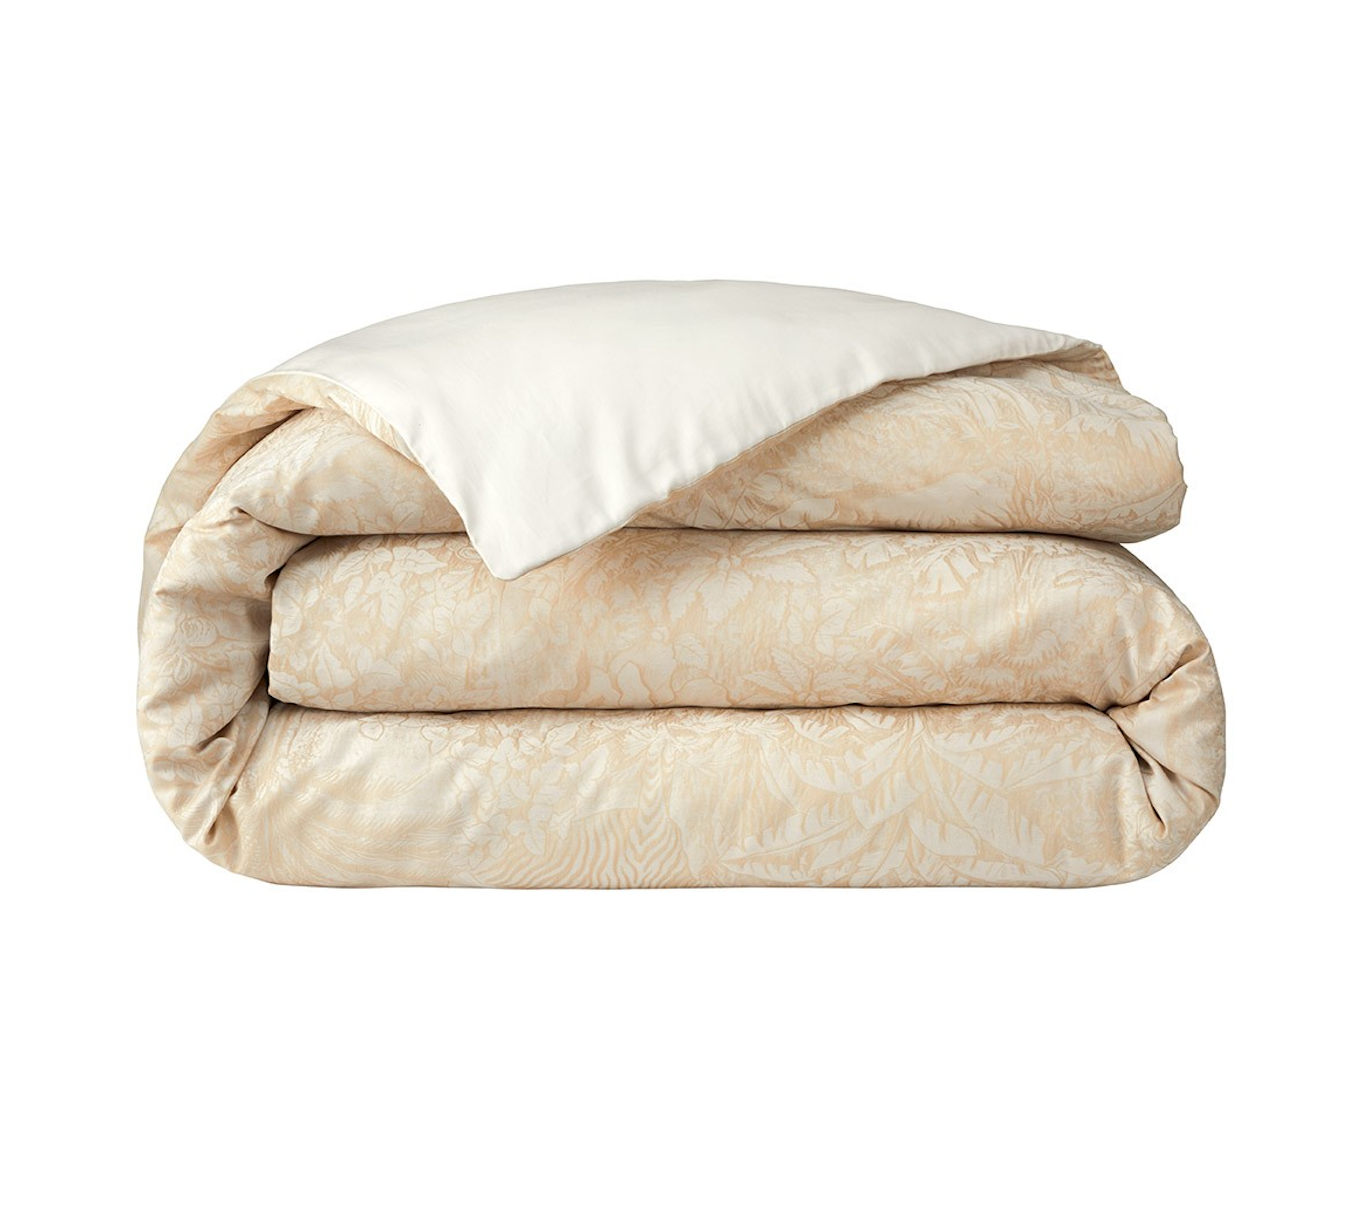 Faune organic cotton duvet cover & shams by Yves Delorme